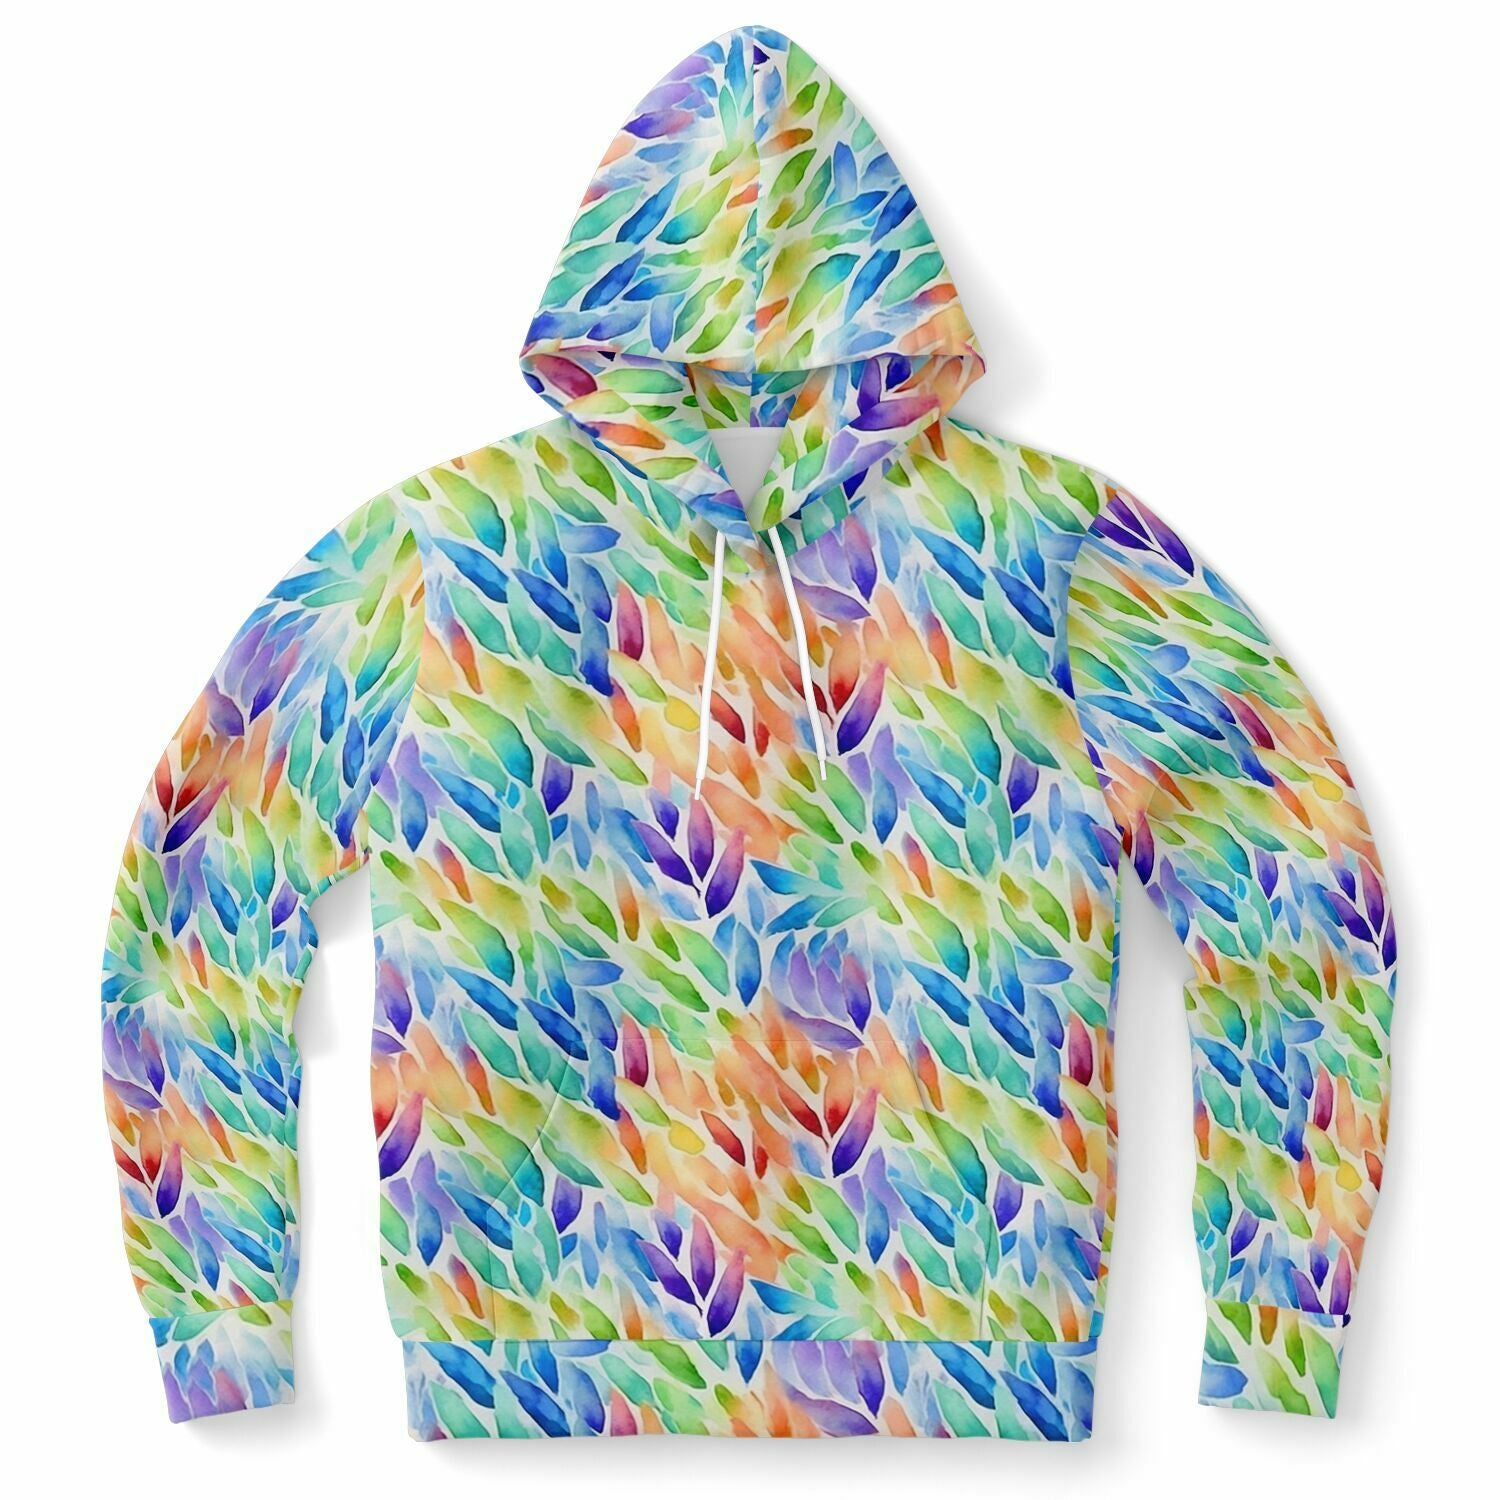 Rainbow Leaves Hoodie, Pride Pullover Men Women Adult Aesthetic Graphic Cotton Hooded Sweatshirt with Pockets Plus Size Starcove Fashion